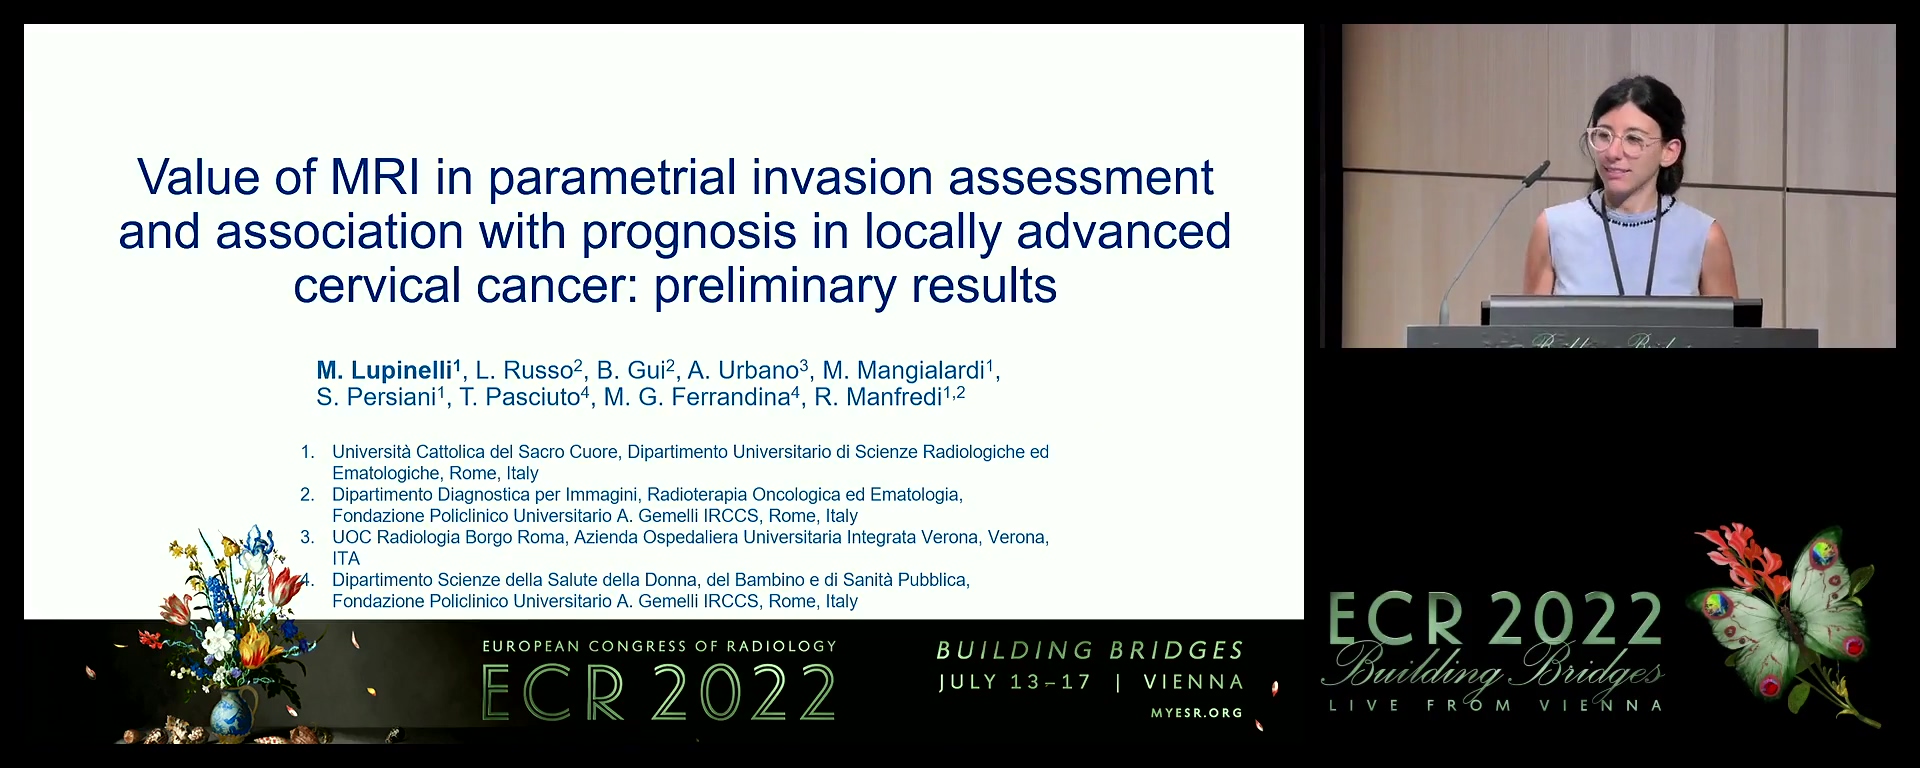 Value of MRI in parametrial invasion assessment and association with prognosis in locally advanced cervical cancer: preliminary results - Michela Lupinelli, Forli / IT